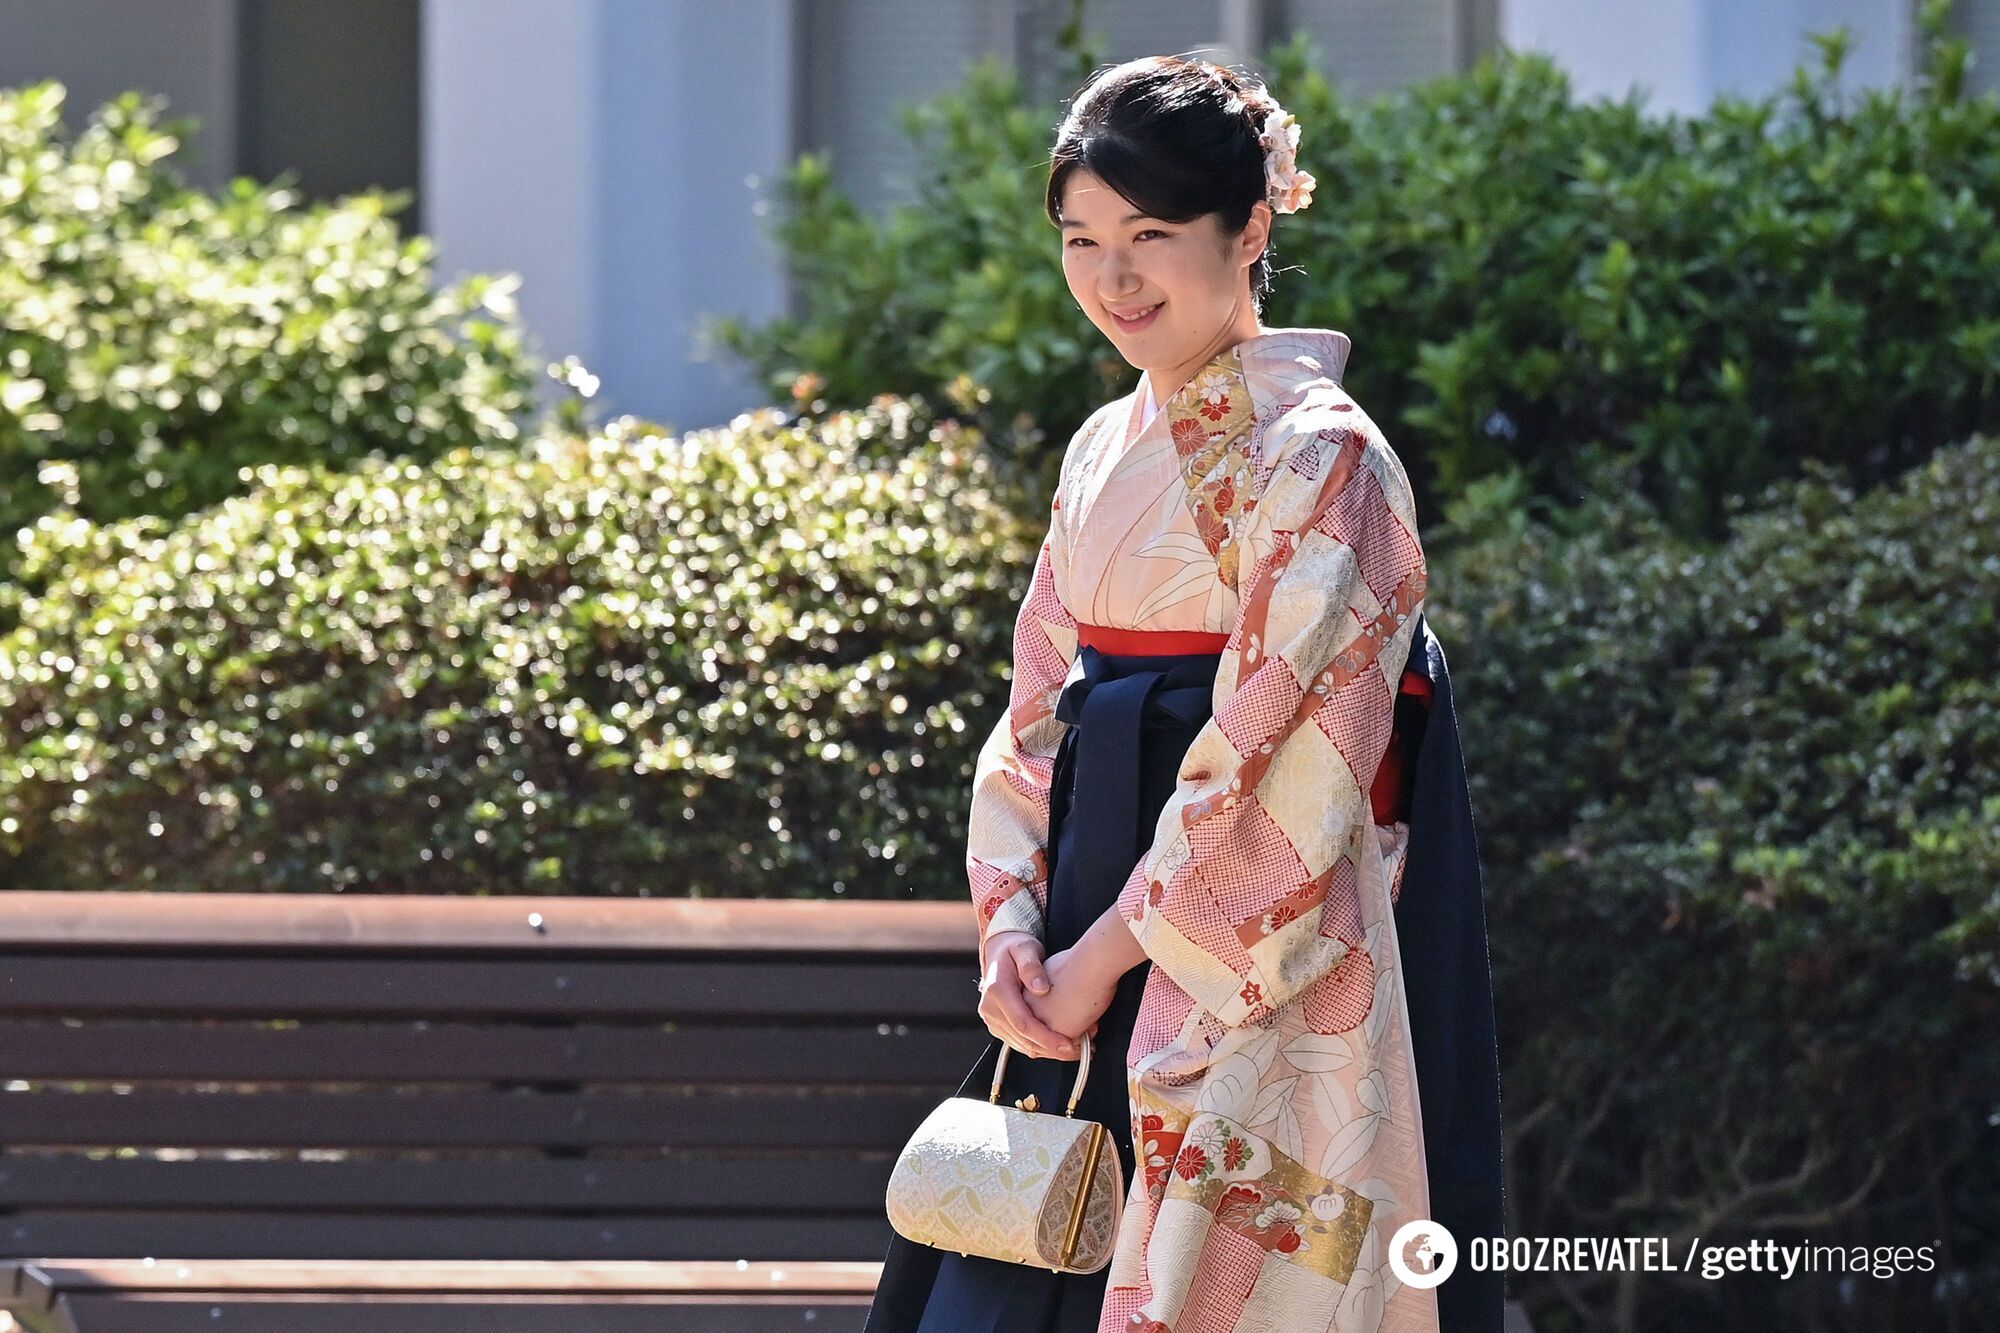 What does 22-year-old Japanese Princess Aiko look like and why did her cousin deprive her of the opportunity to become empress?